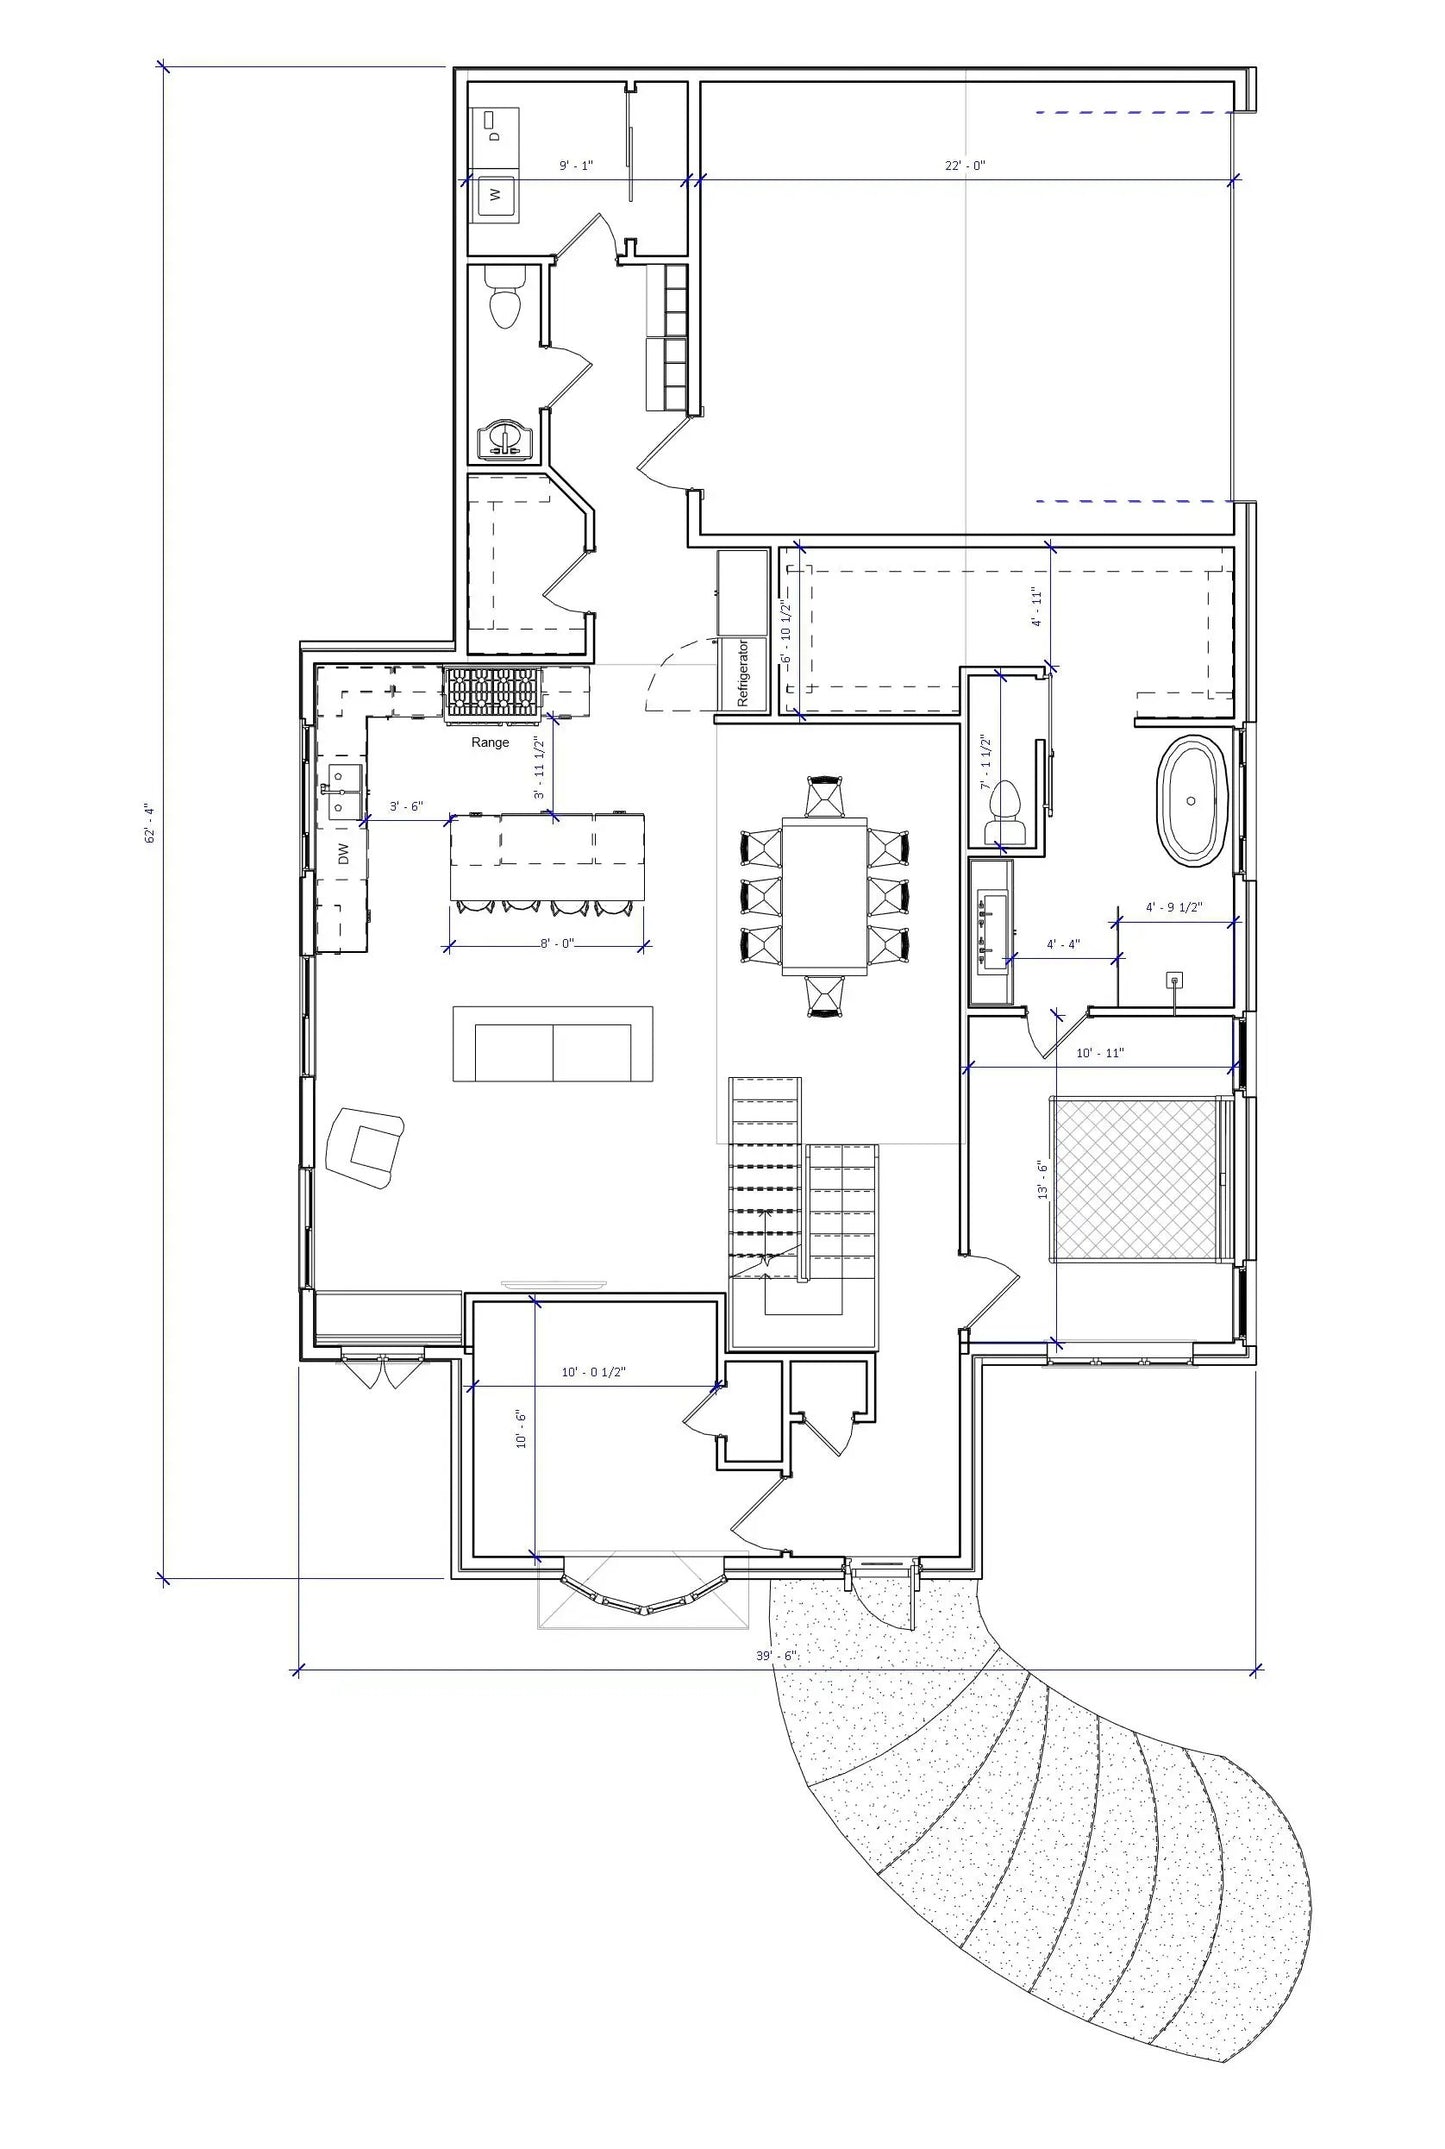 a drawing of a floor plan